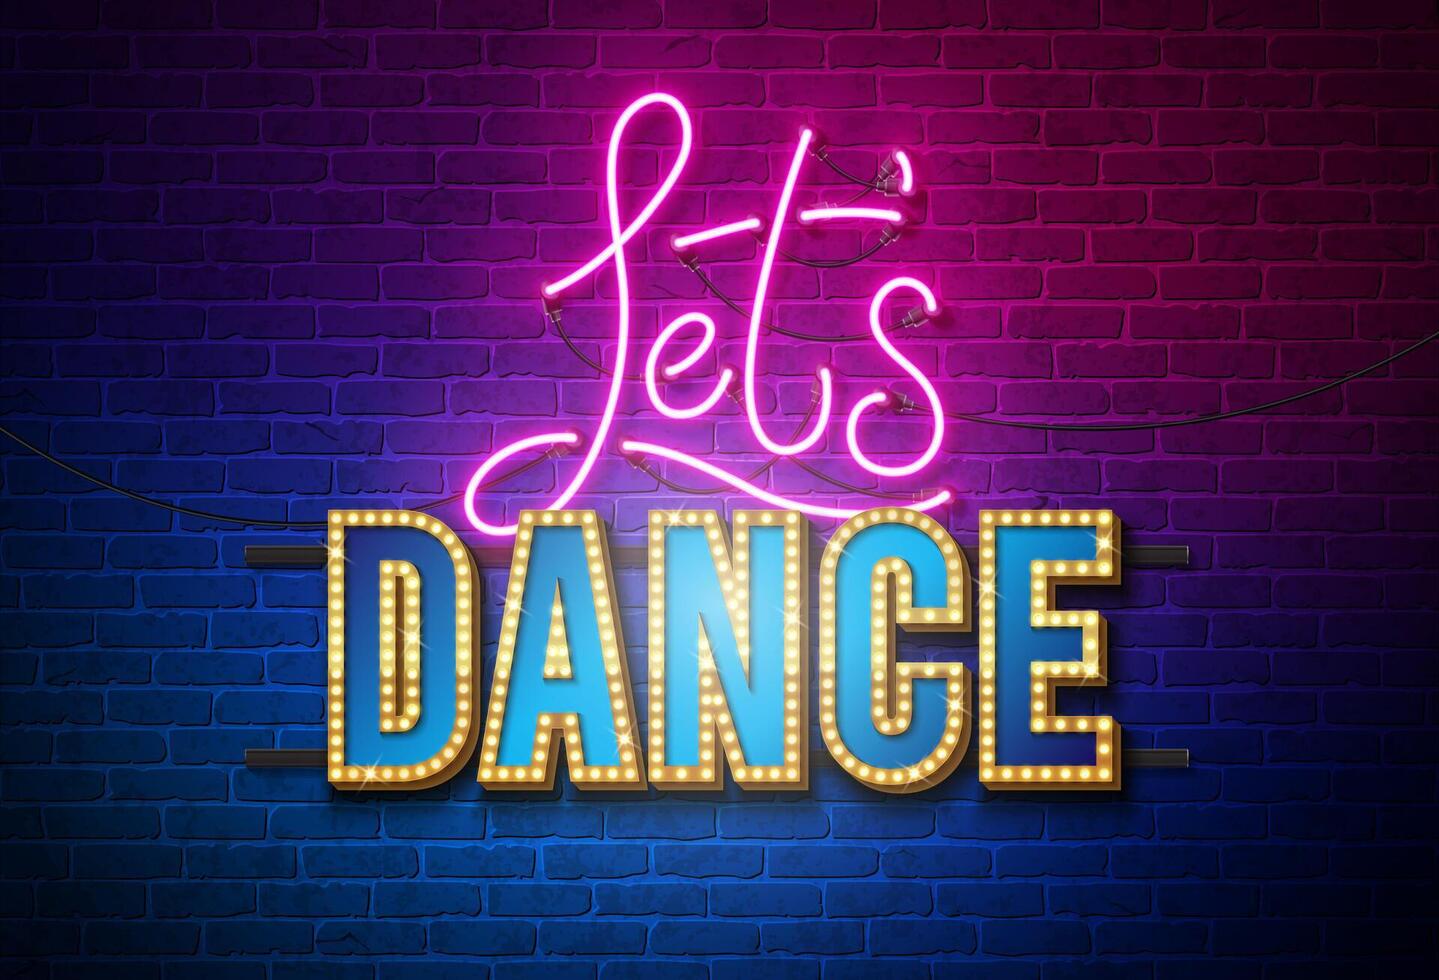 Lets Dance Vector Illustration with Bright Neon Light Lettering on Brick Wall Background. April 29 Dance Day Celebration Design Template for Banner, Flyer, Invitation, Brochure, Poster or Card